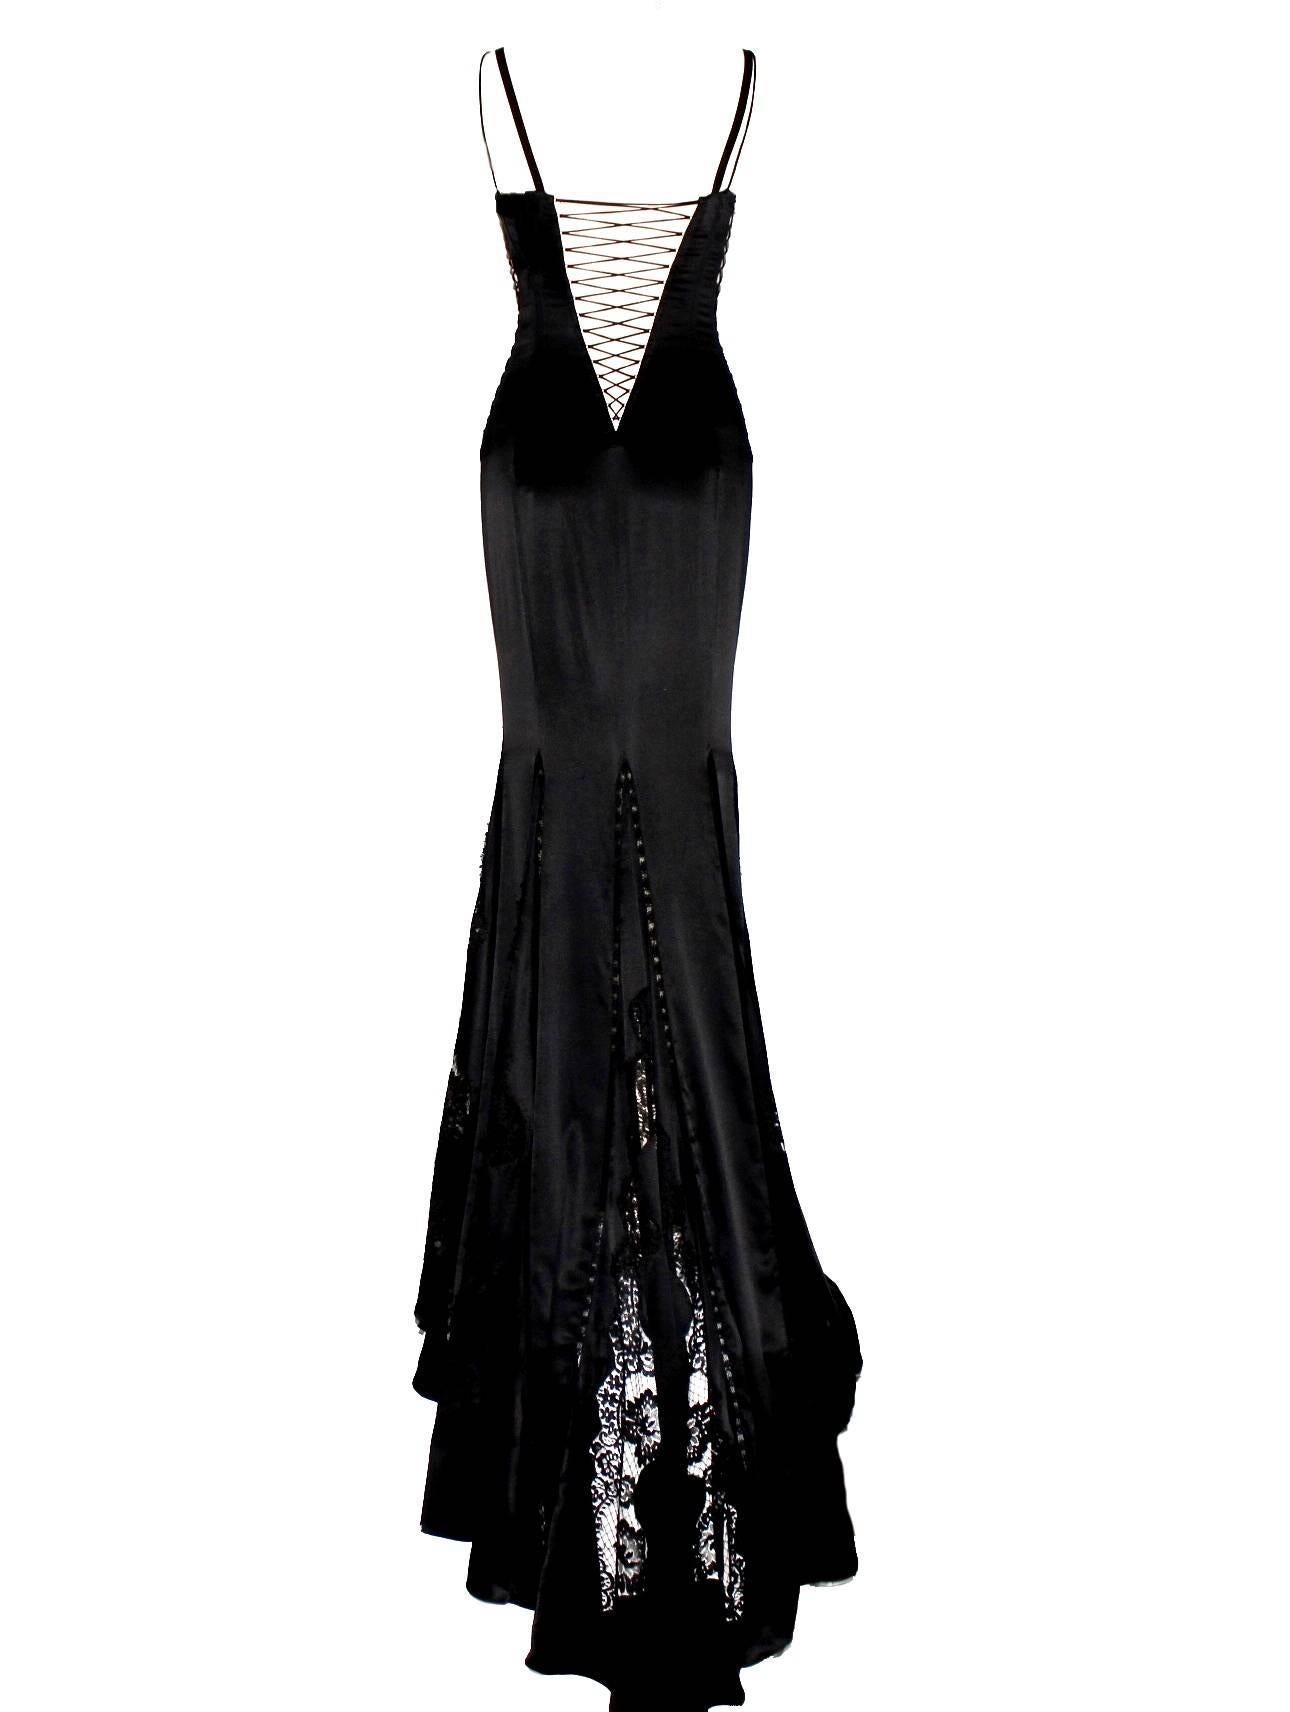 Gorgeous Dolce & Gabbana Black Lace Up Evening Gown Worn By 